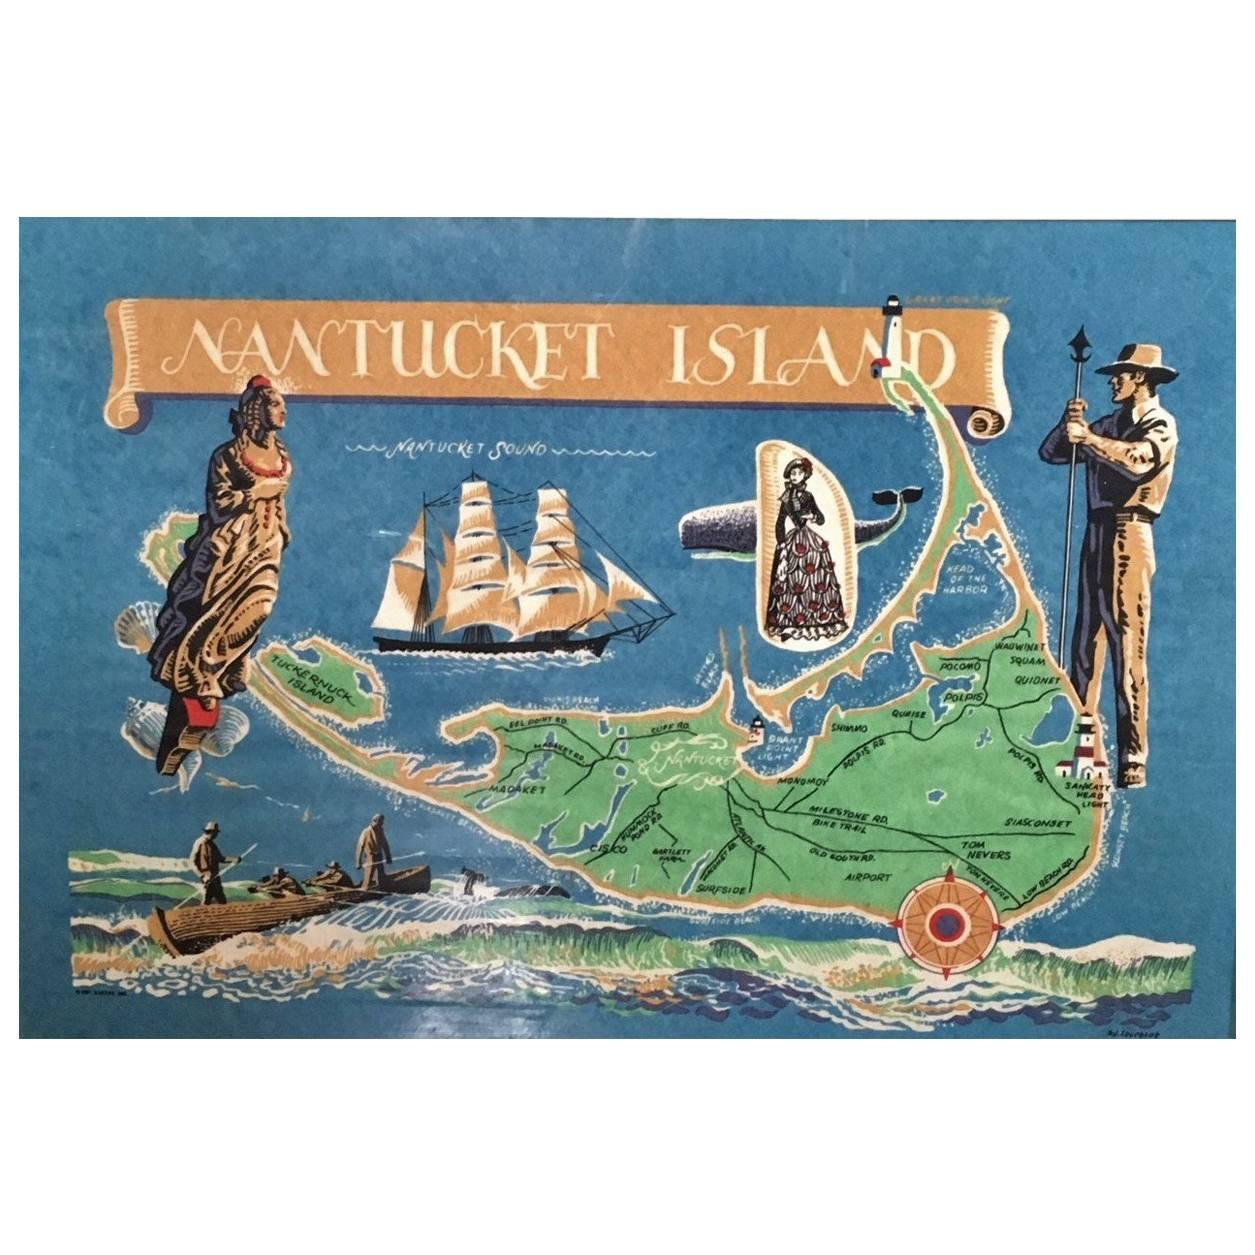 Hand Colored Map of Nantucket by Sol Levenson, 1981